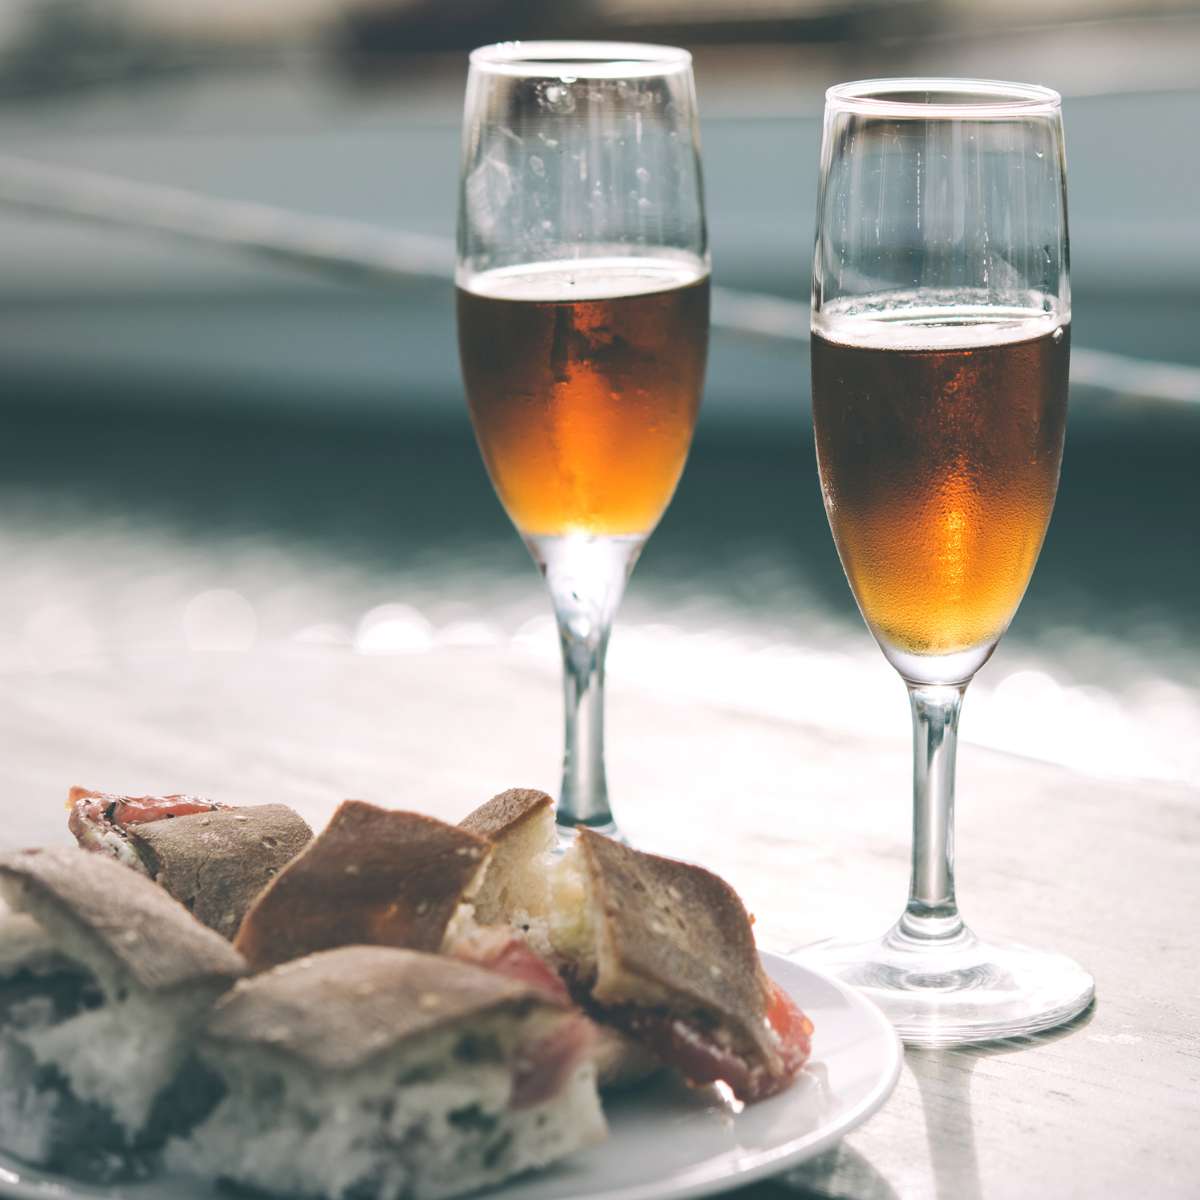 Wine glasses with sandwiches on a plate, elegantly arranged on a table